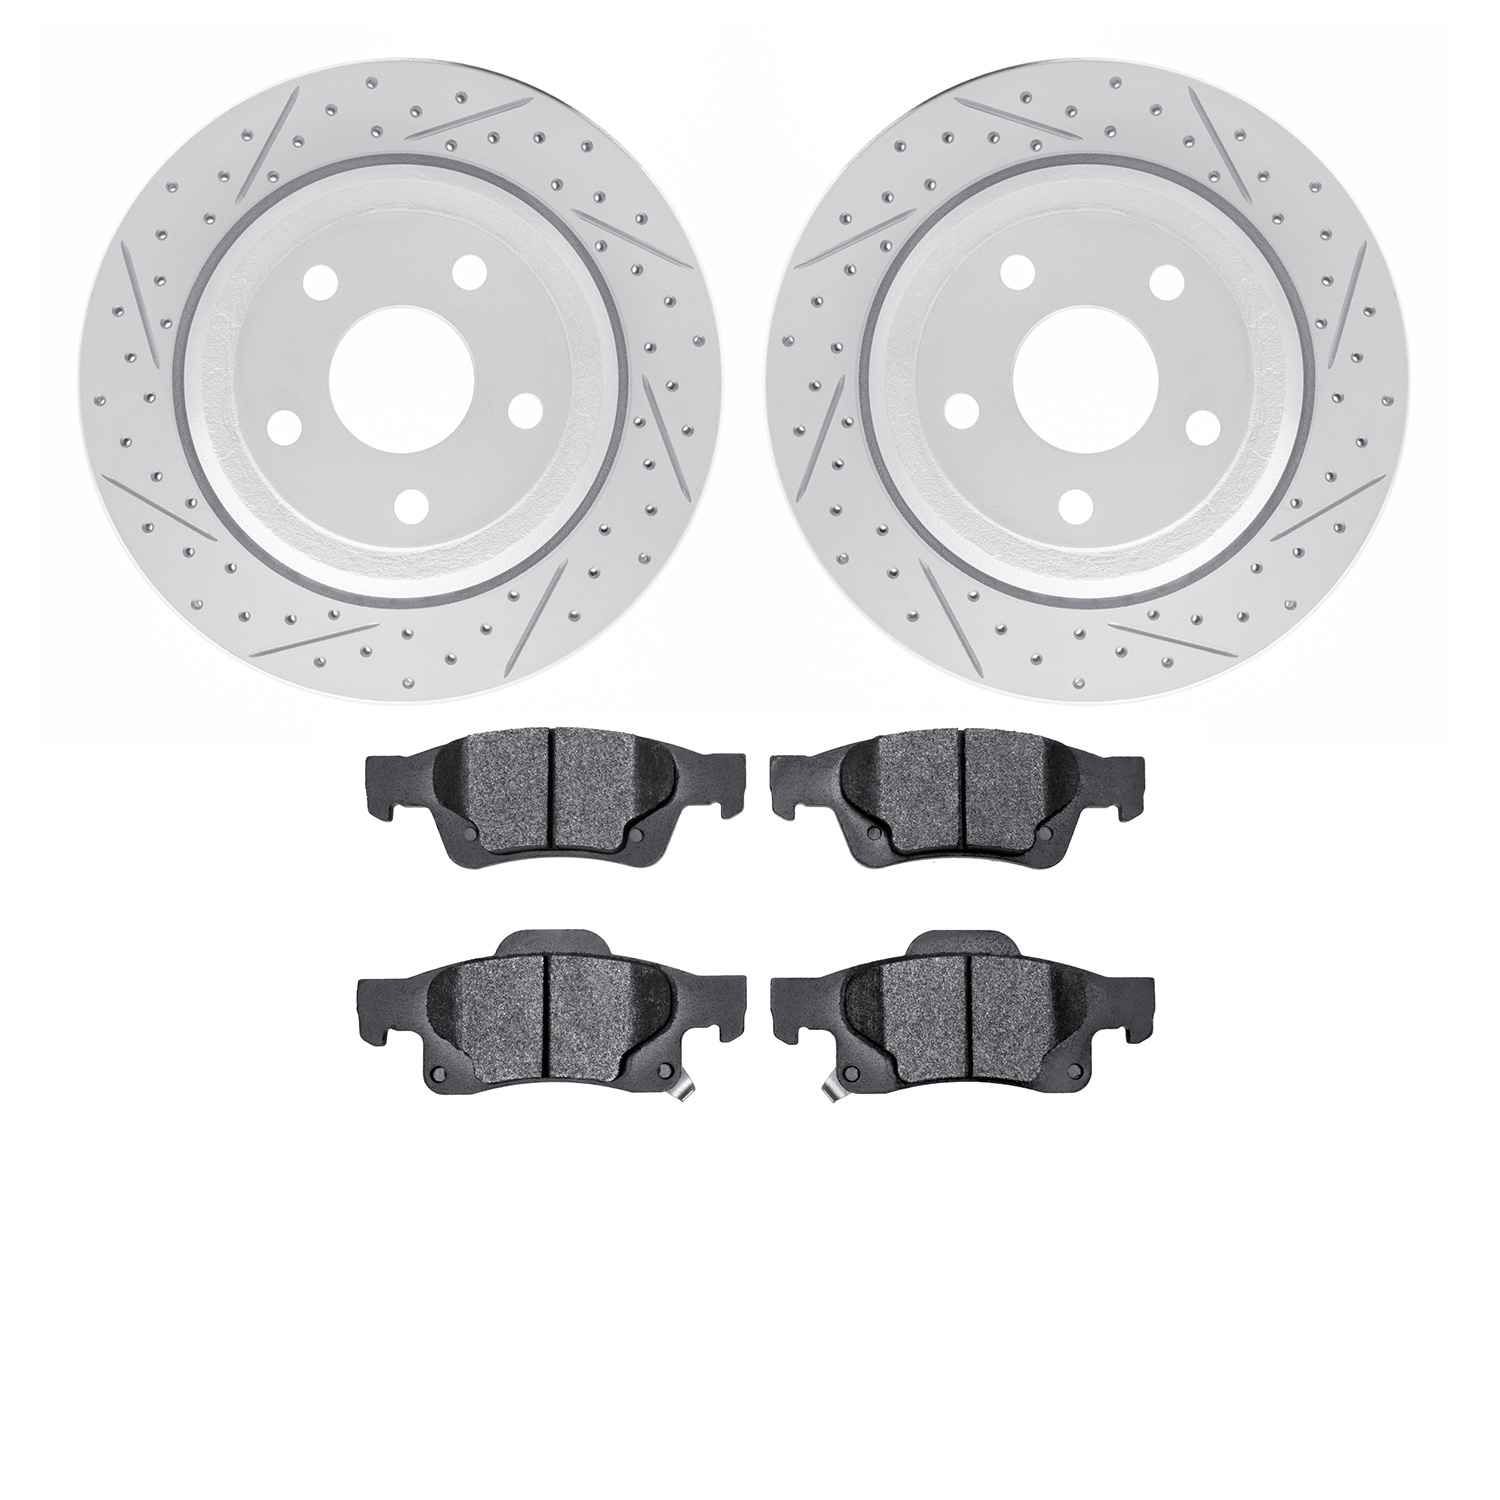 2402-42007 Geoperformance Drilled/Slotted Brake Rotors with Ultimate-Duty Brake Pads Kit, Fits Select Mopar, Position: Rear